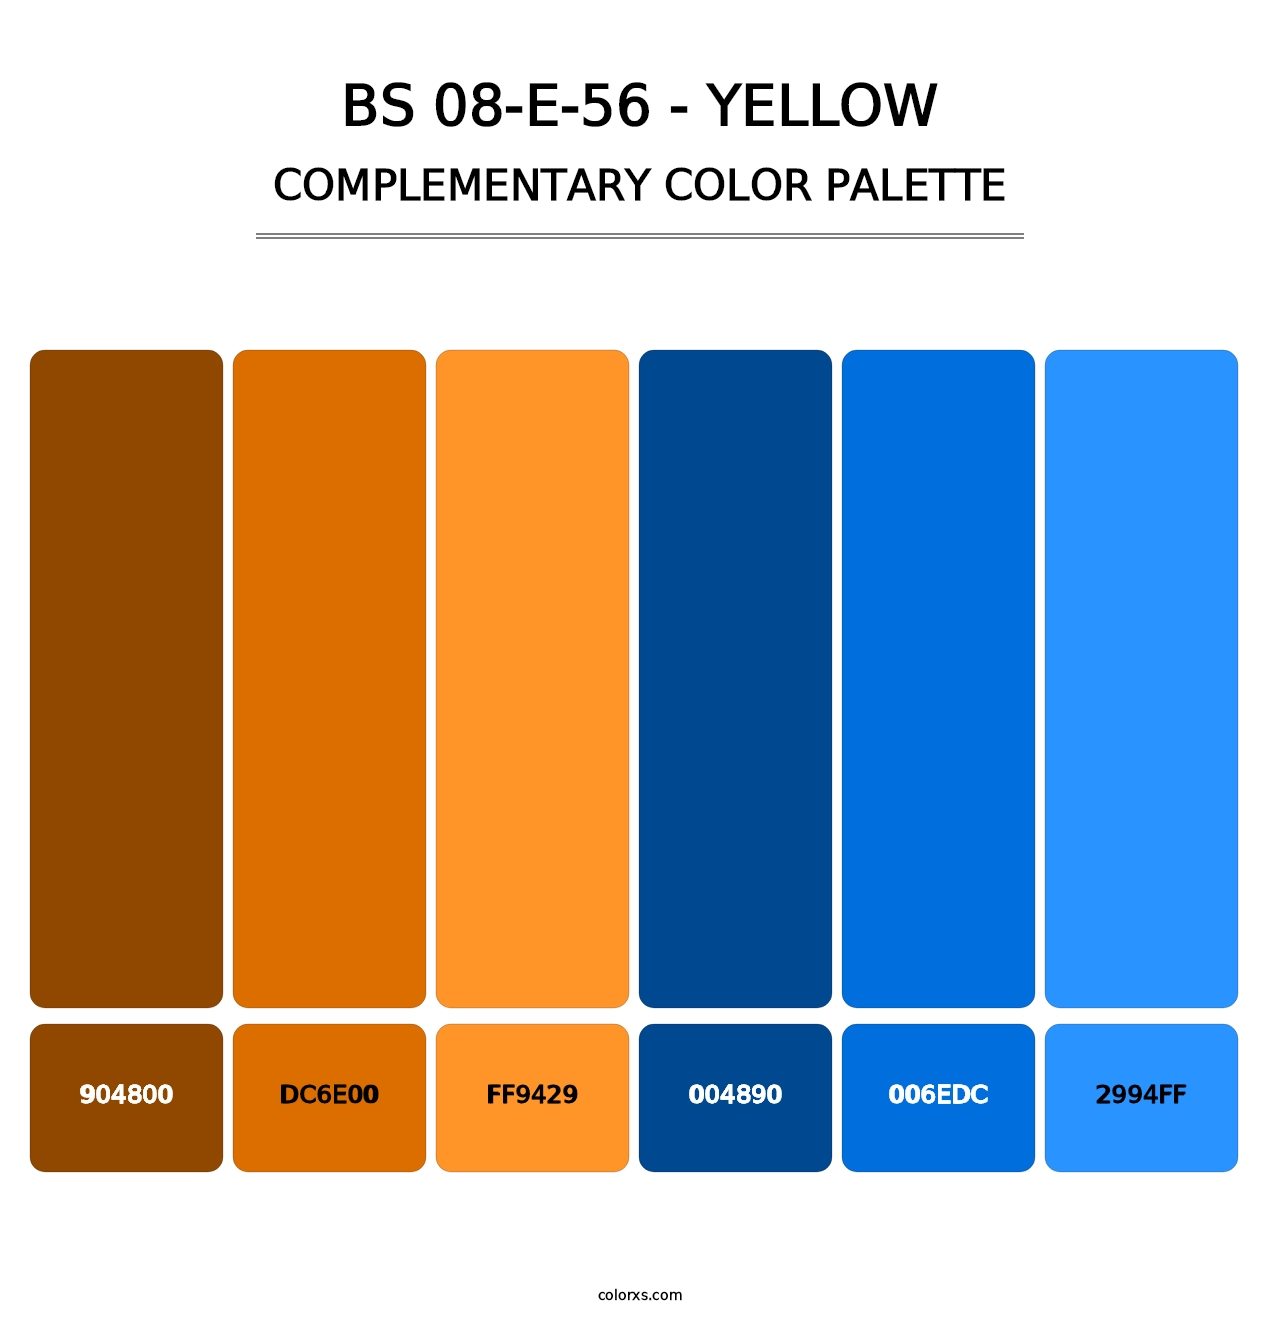 BS 08-E-56 - Yellow - Complementary Color Palette